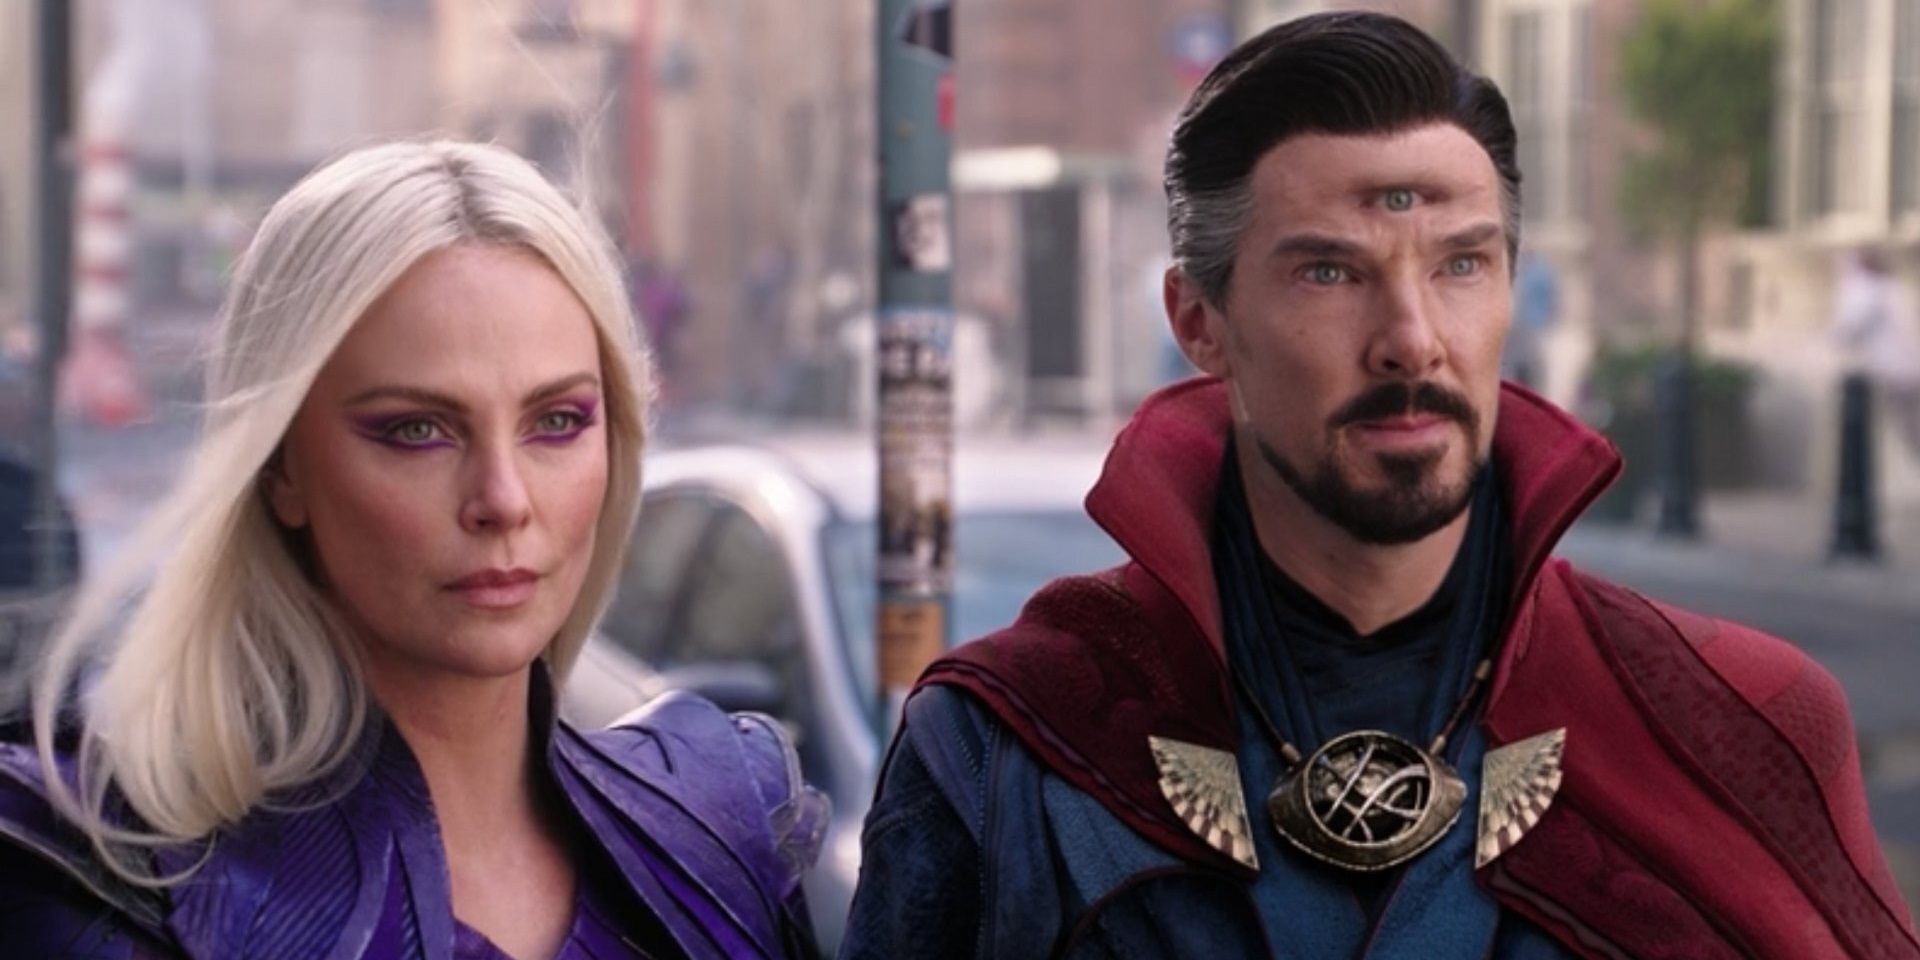 Strange and Clea in the mid-credits scene of Doctor Strange in the Multiverse of Madness with 3rd eye